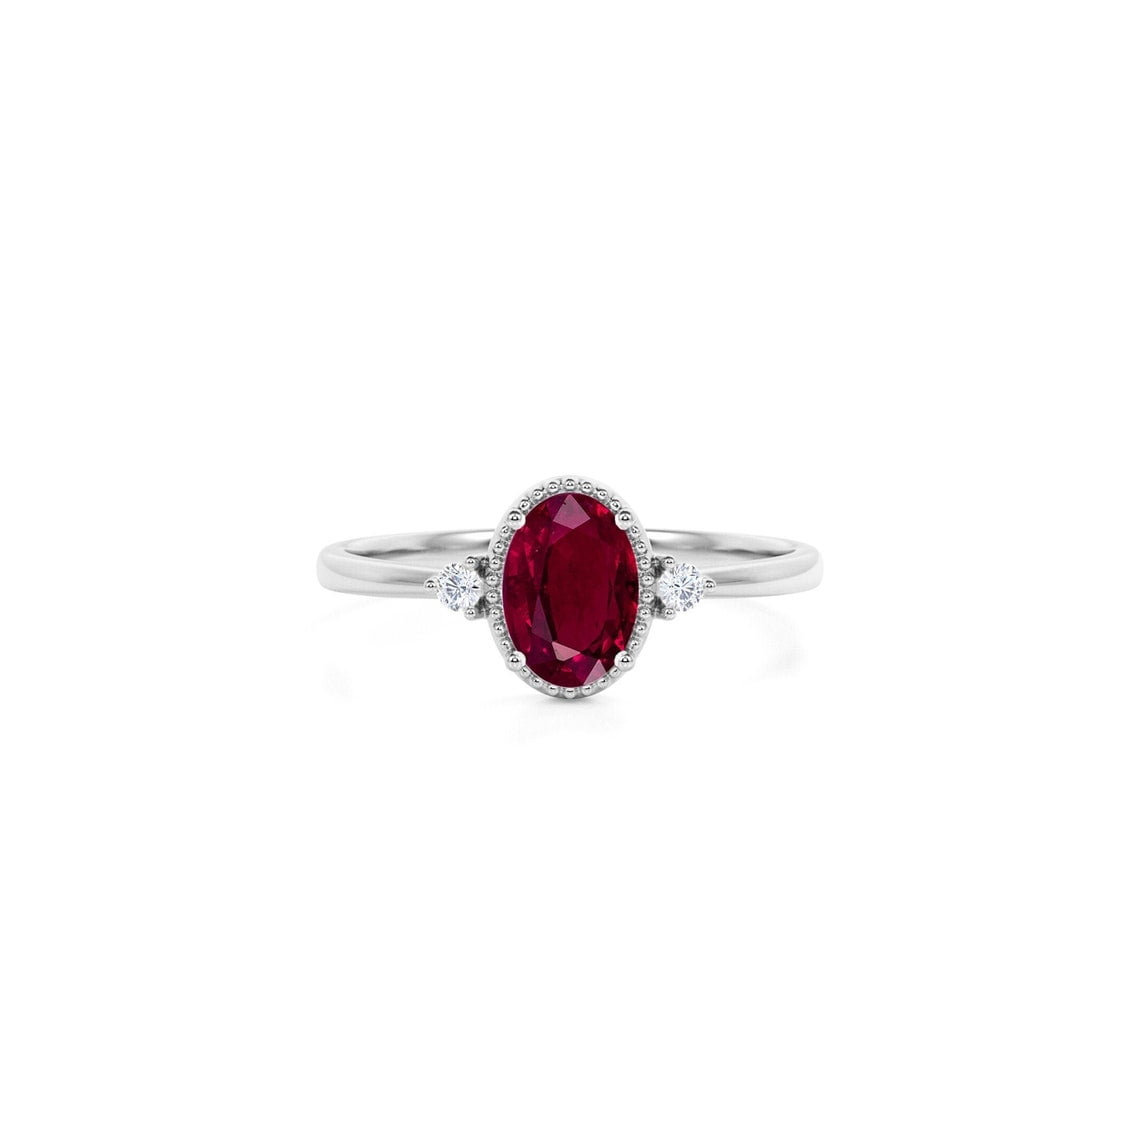 Real Ruby Ring / 0321-3205000 - Jewellery - 1081767443